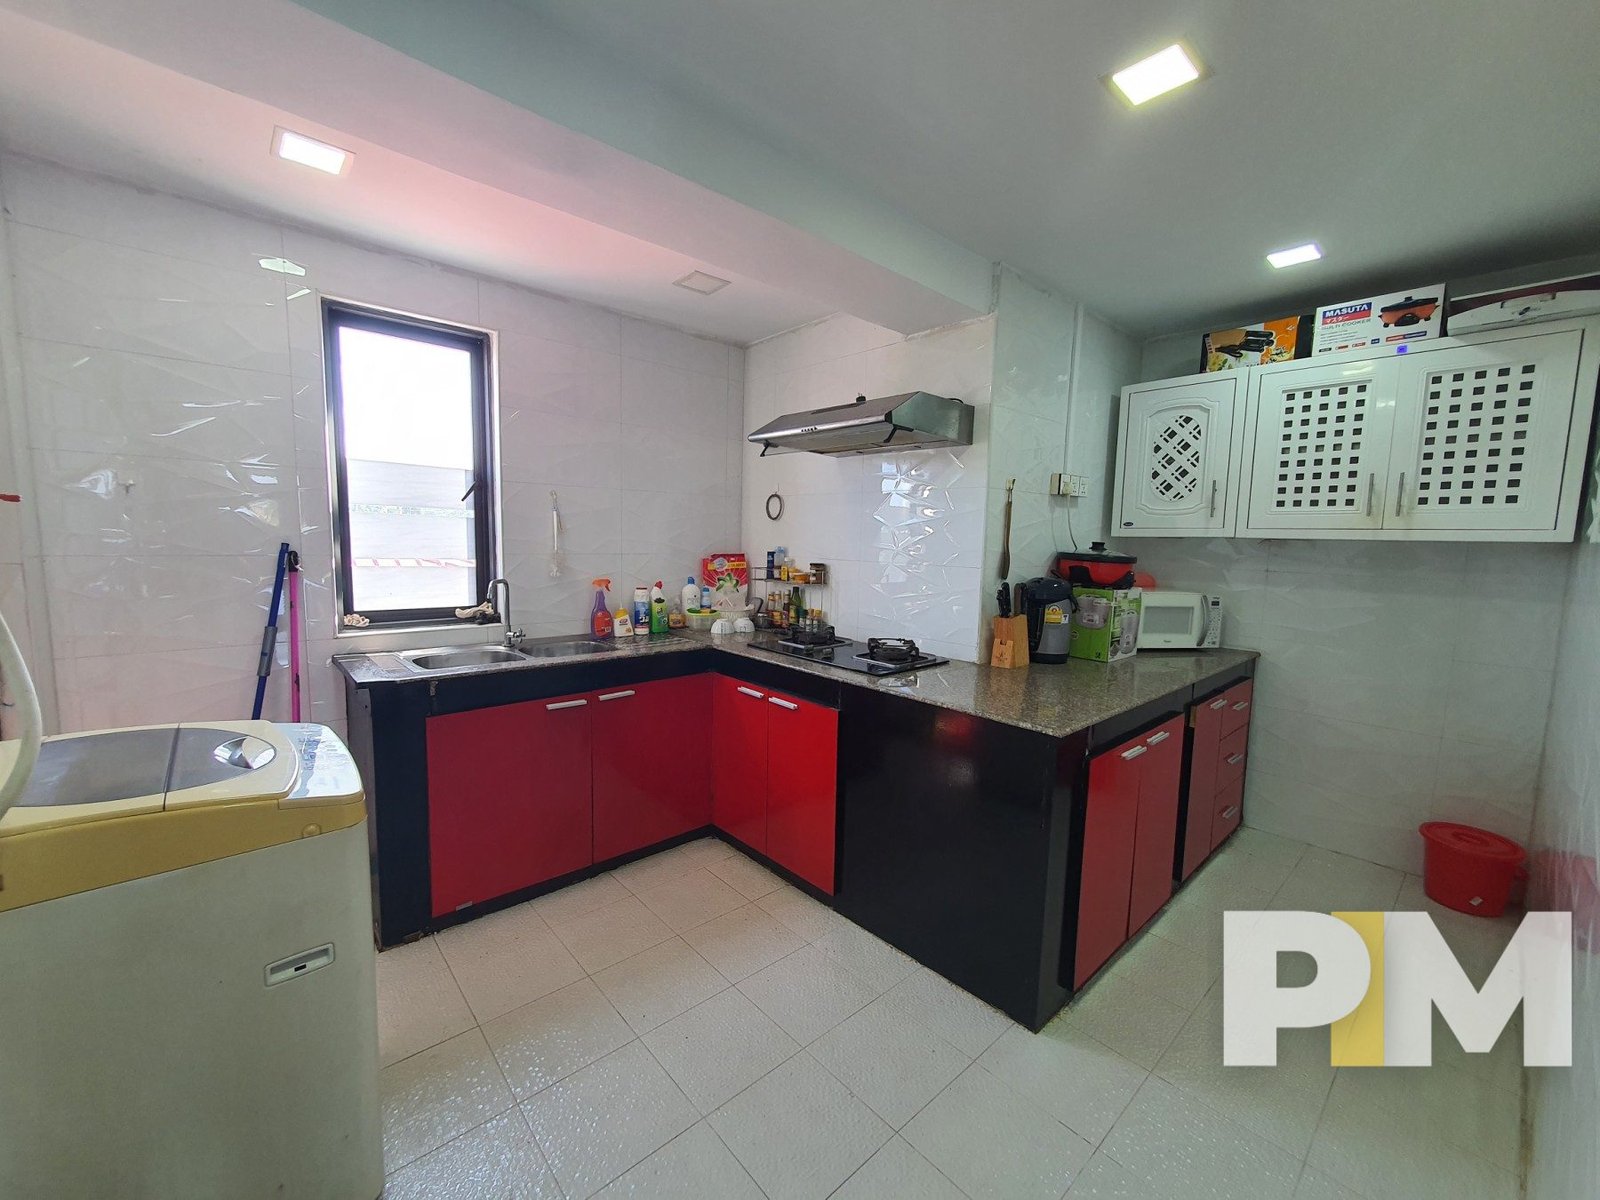 kitchen with cabinets - Condo for rent in Yankin